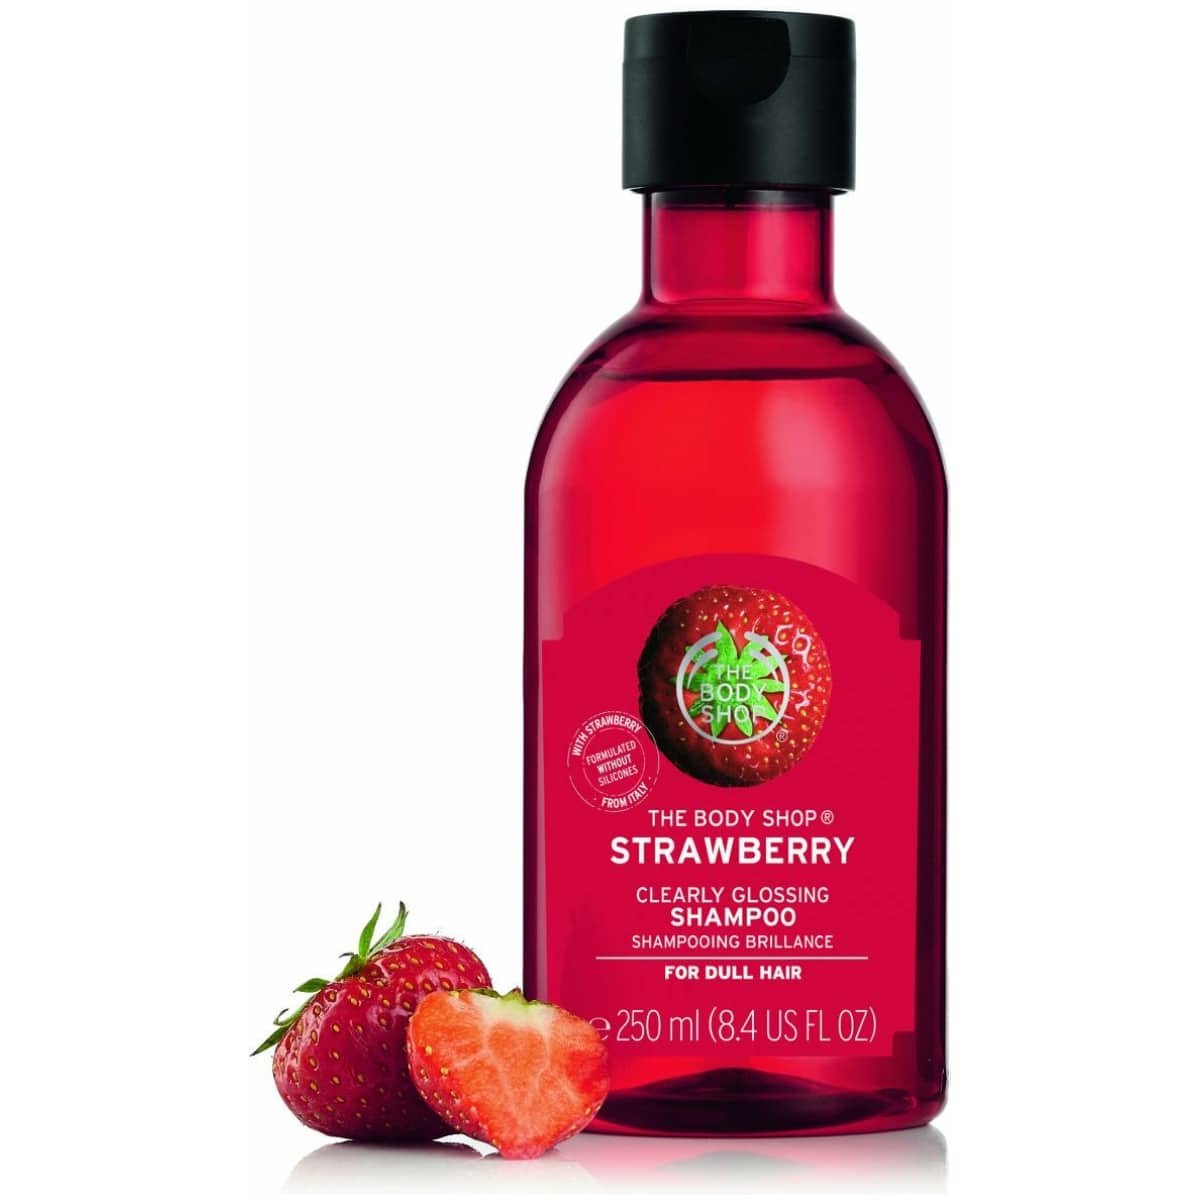 The Body Shop Strawberry Clearly Glossing Shampoo 250Ml